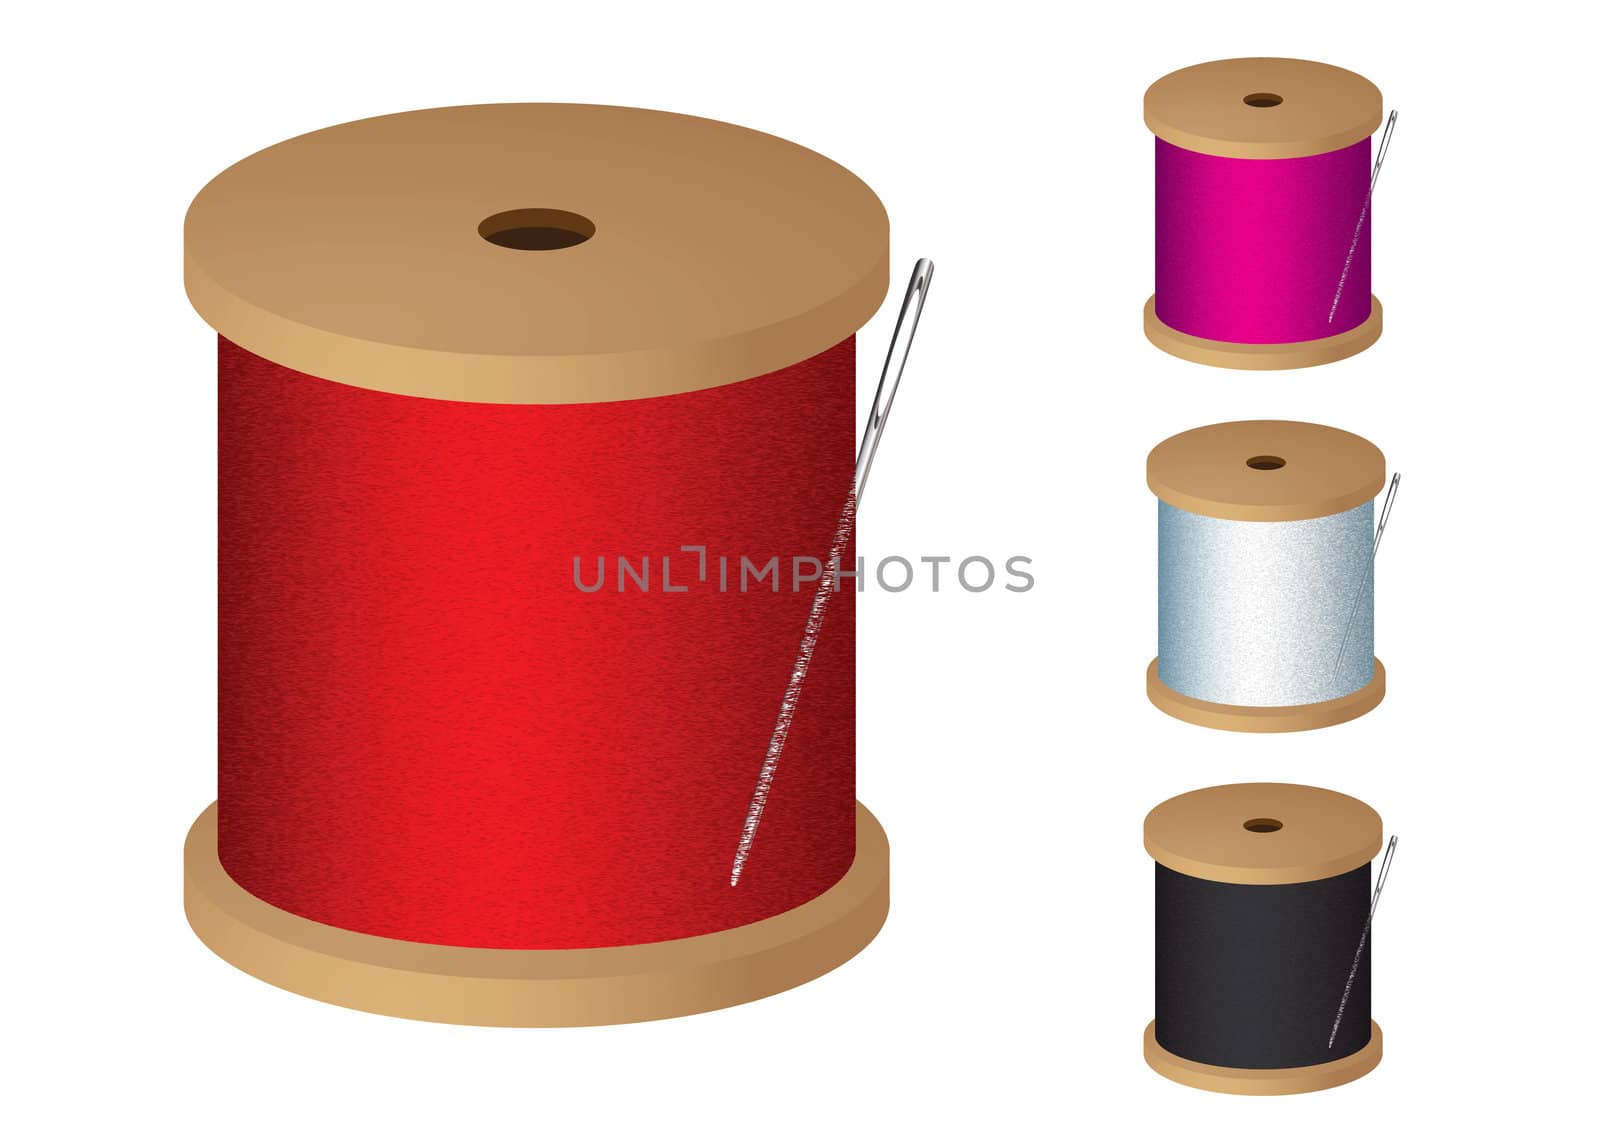 Cotton reel collection with sewing needle and colored thread